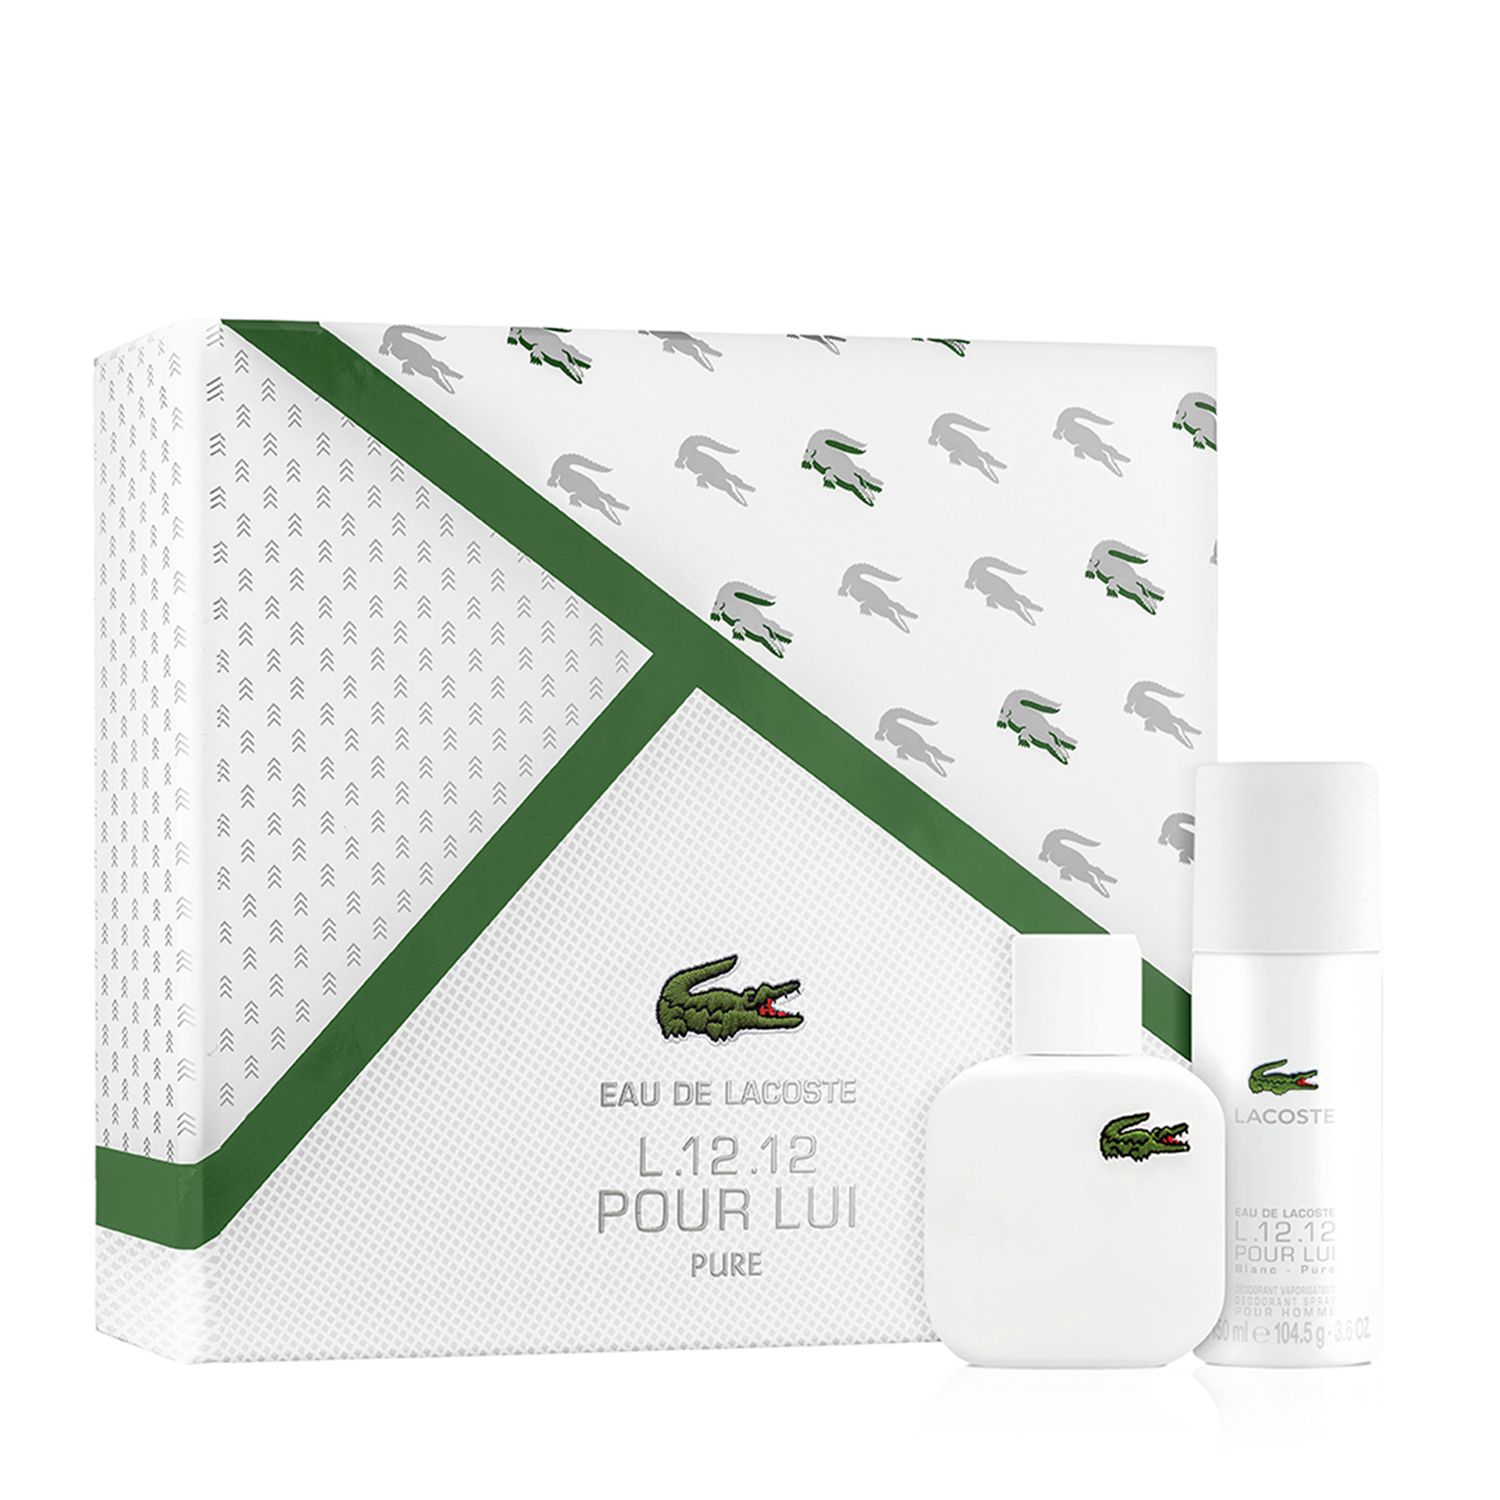 lacoste 212 blanc off 63% - online-sms.in